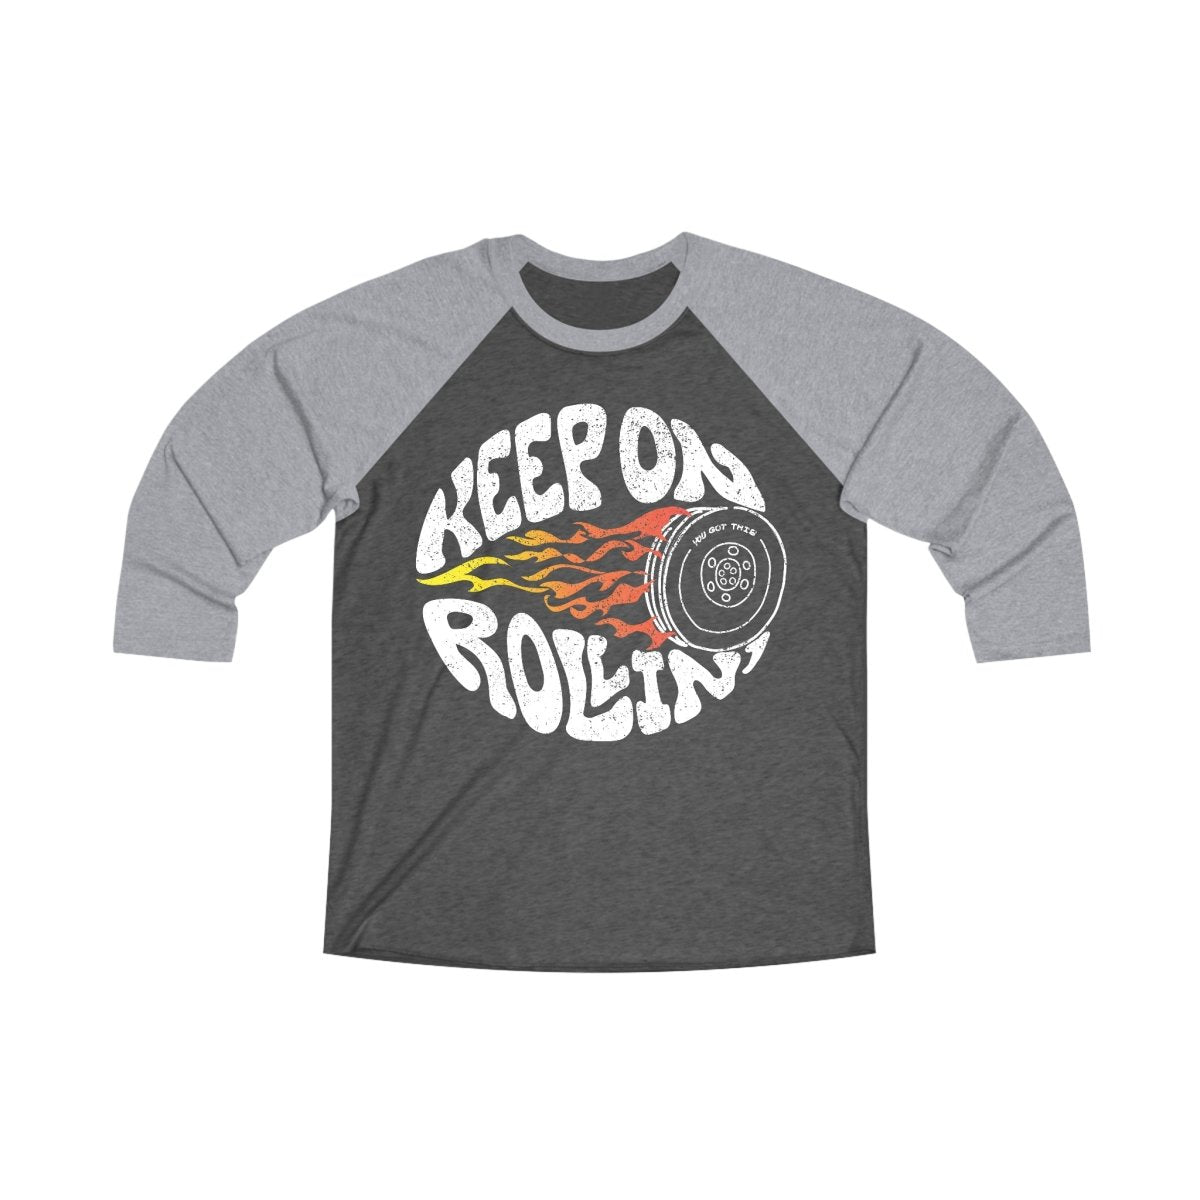 Keep On Rollin 3/4 T-Shirt, You Got This, Adventure or Tough Times Gift